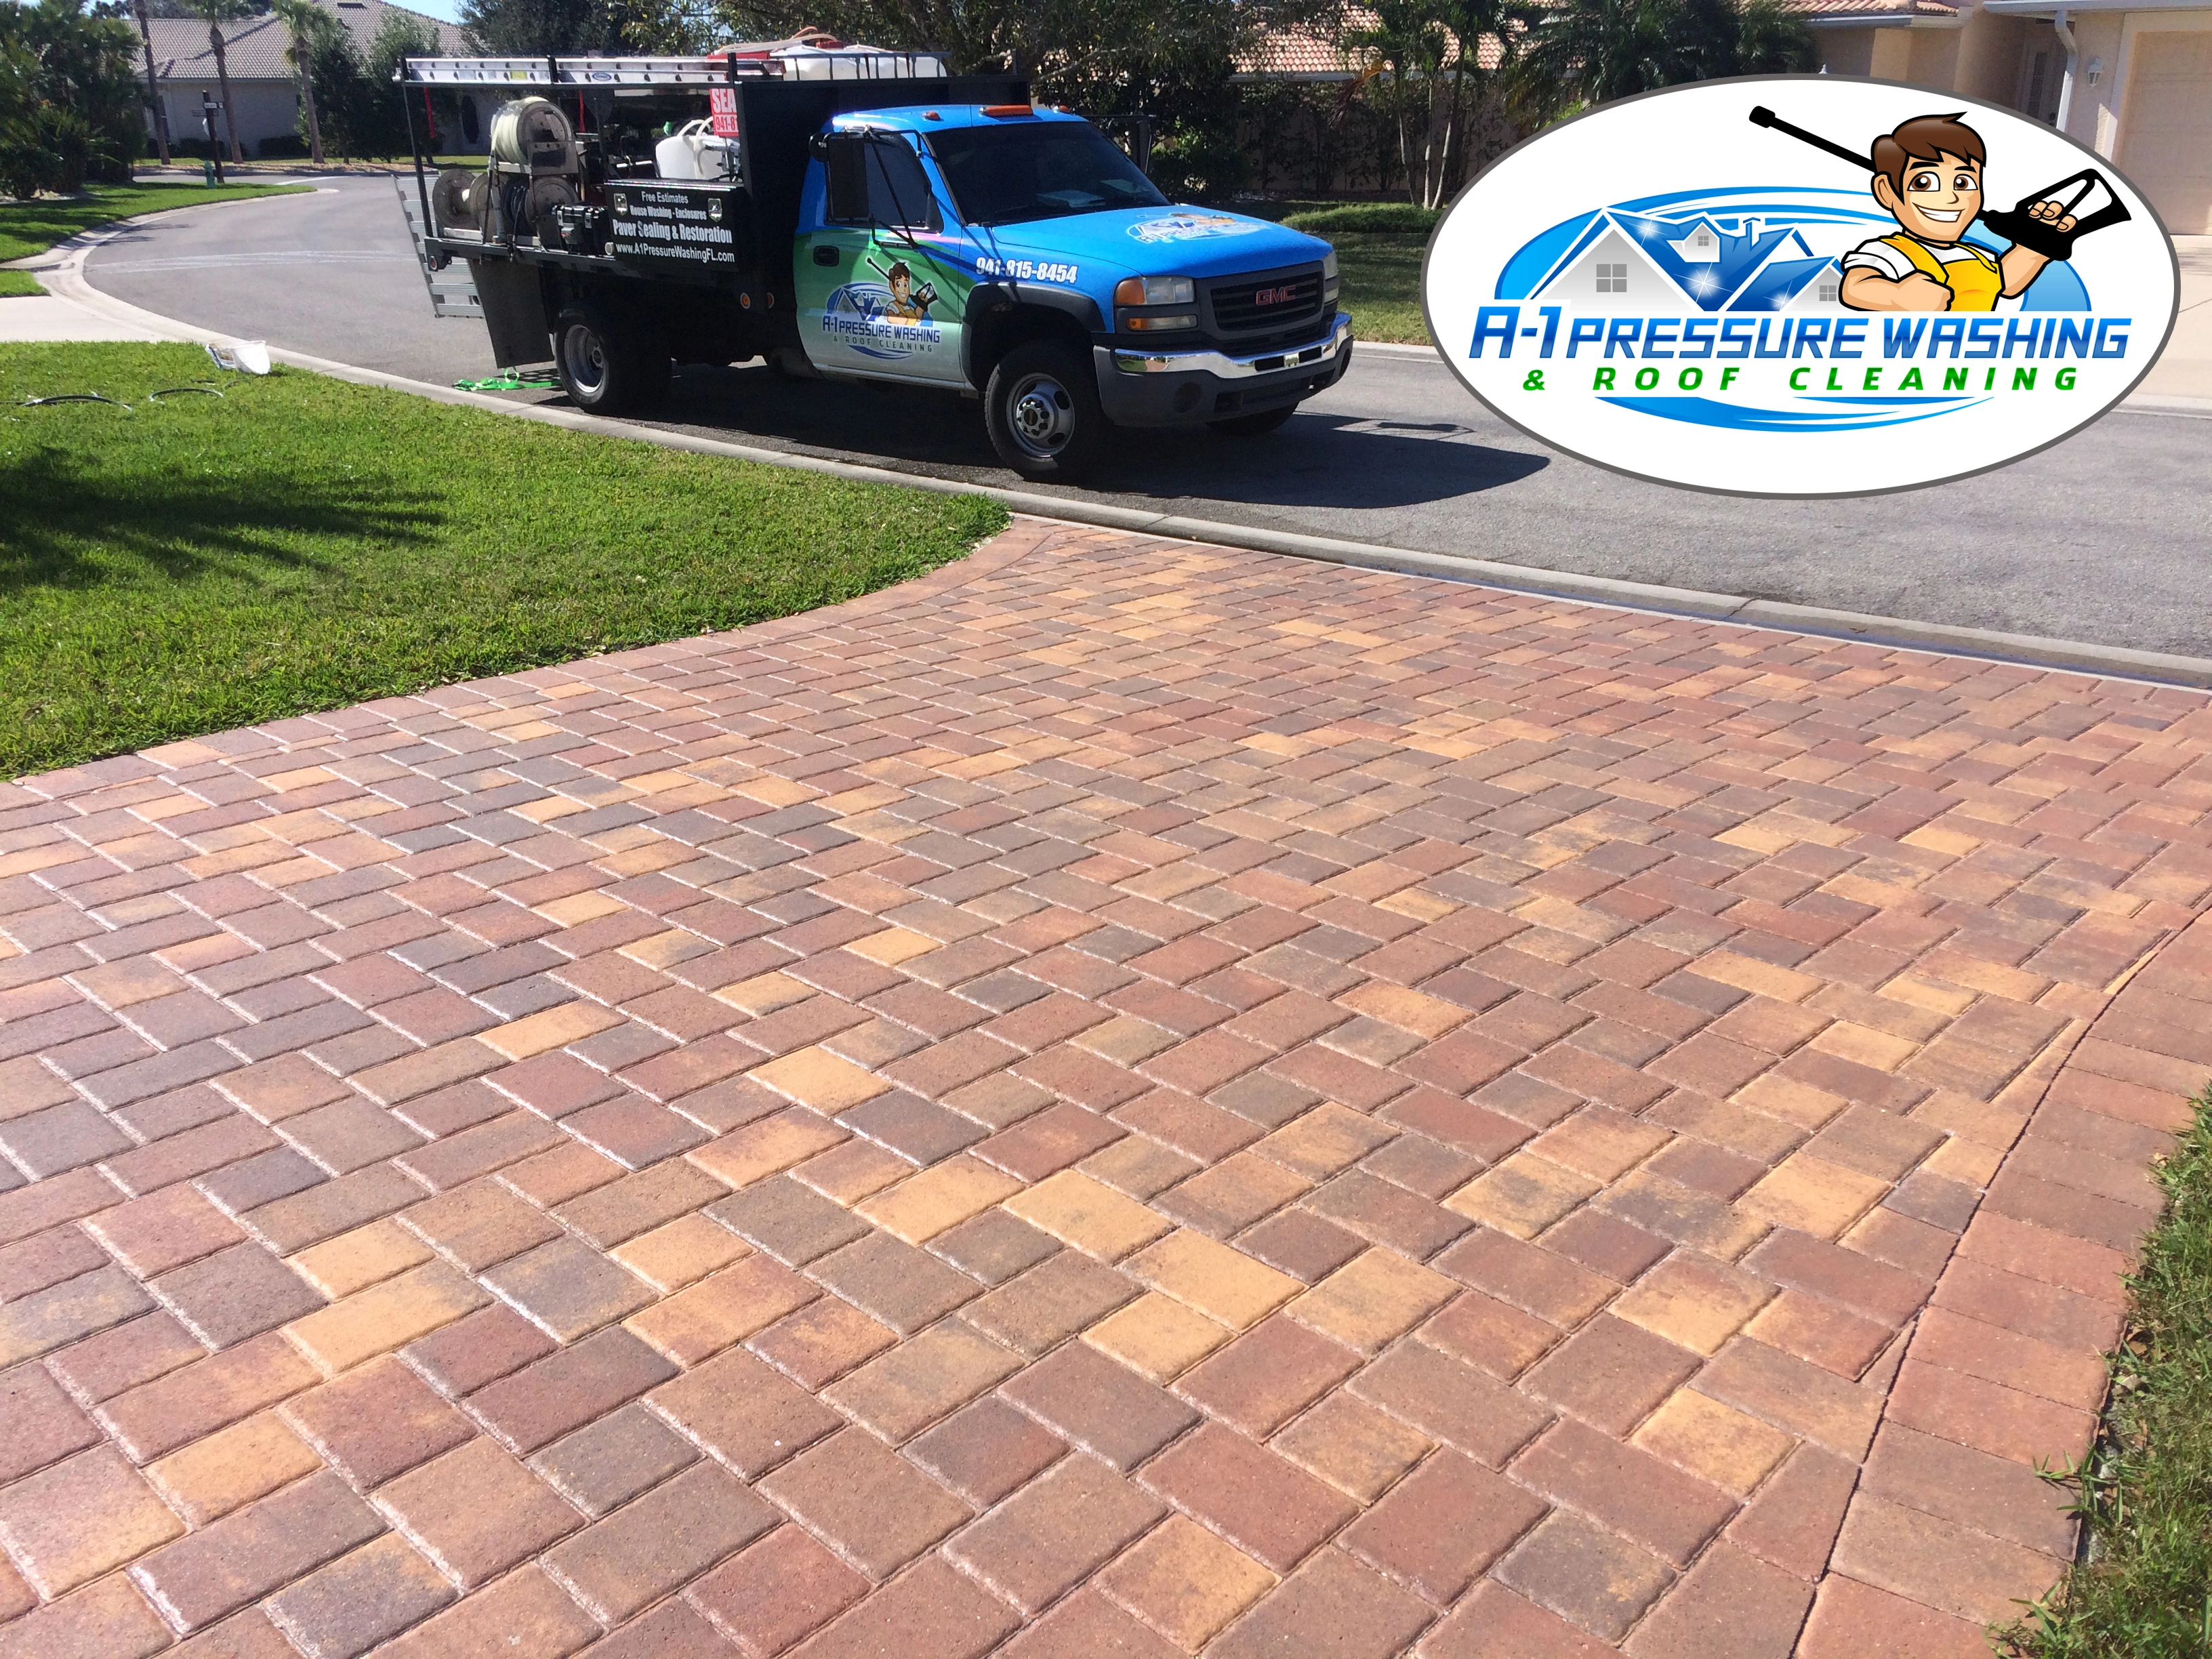 Best Brick Paver Sealing Services | A-1 Pressure Washing & Roof Cleaning | 941-815-8454 